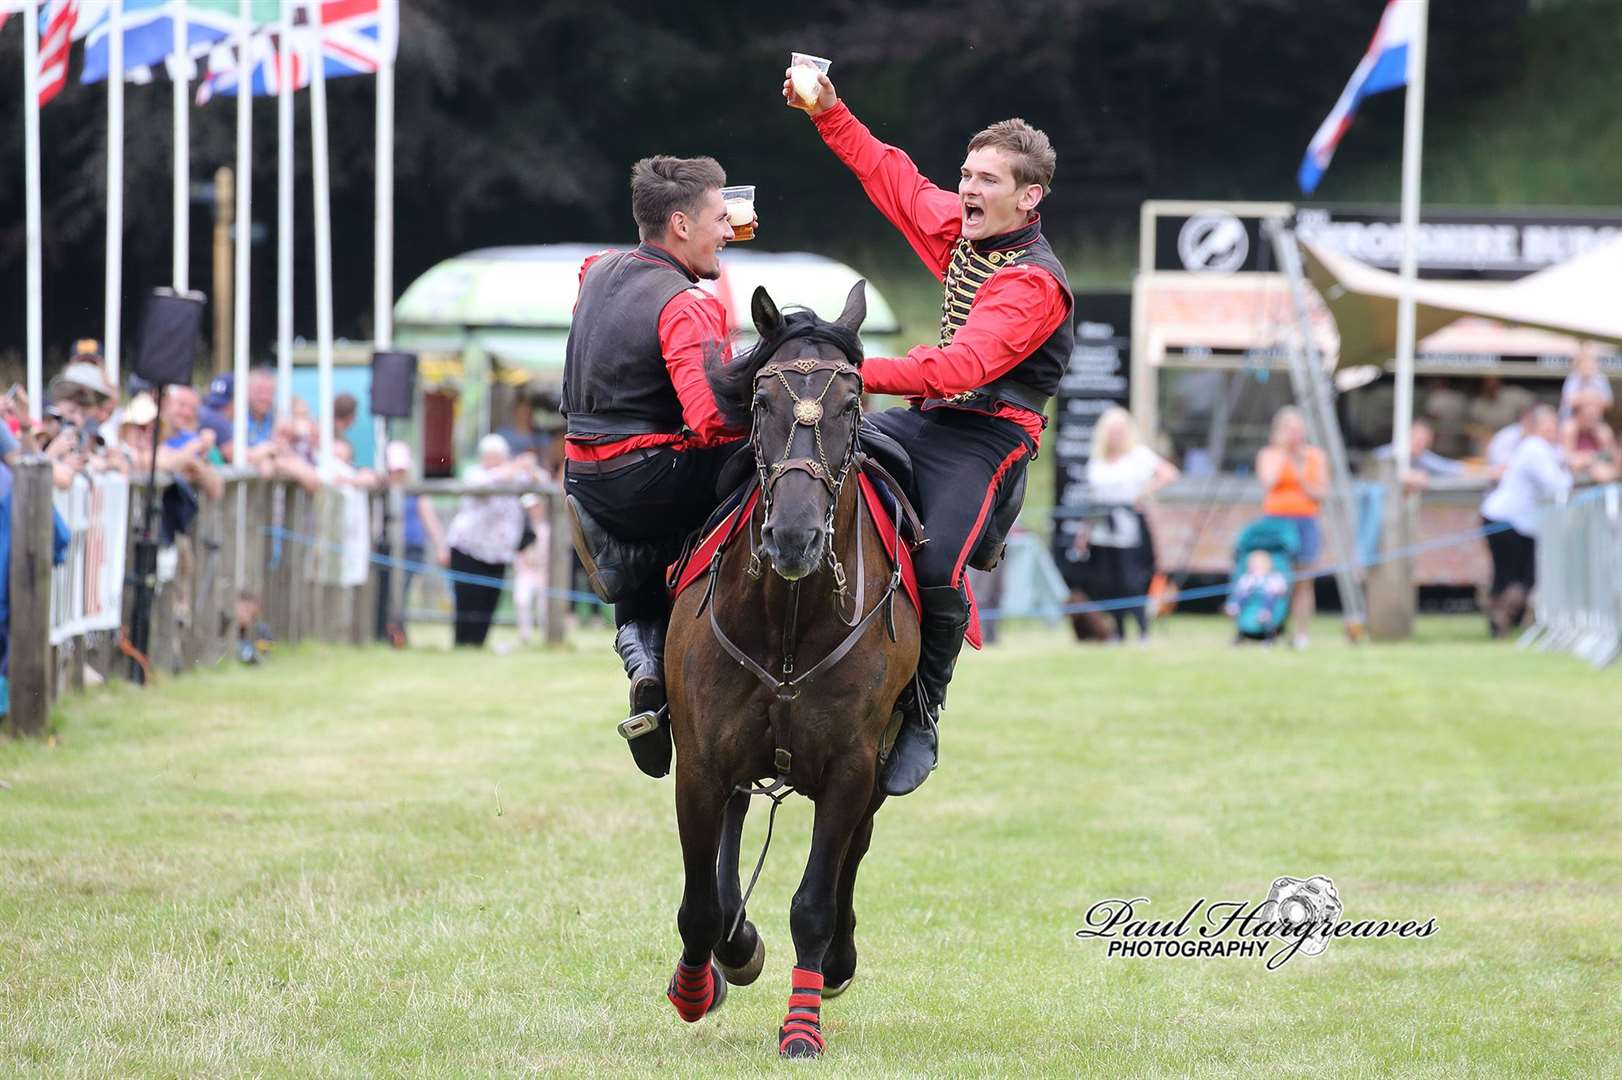 The International Dzhigitovka Show will be performing at the 2019 Kent County Show